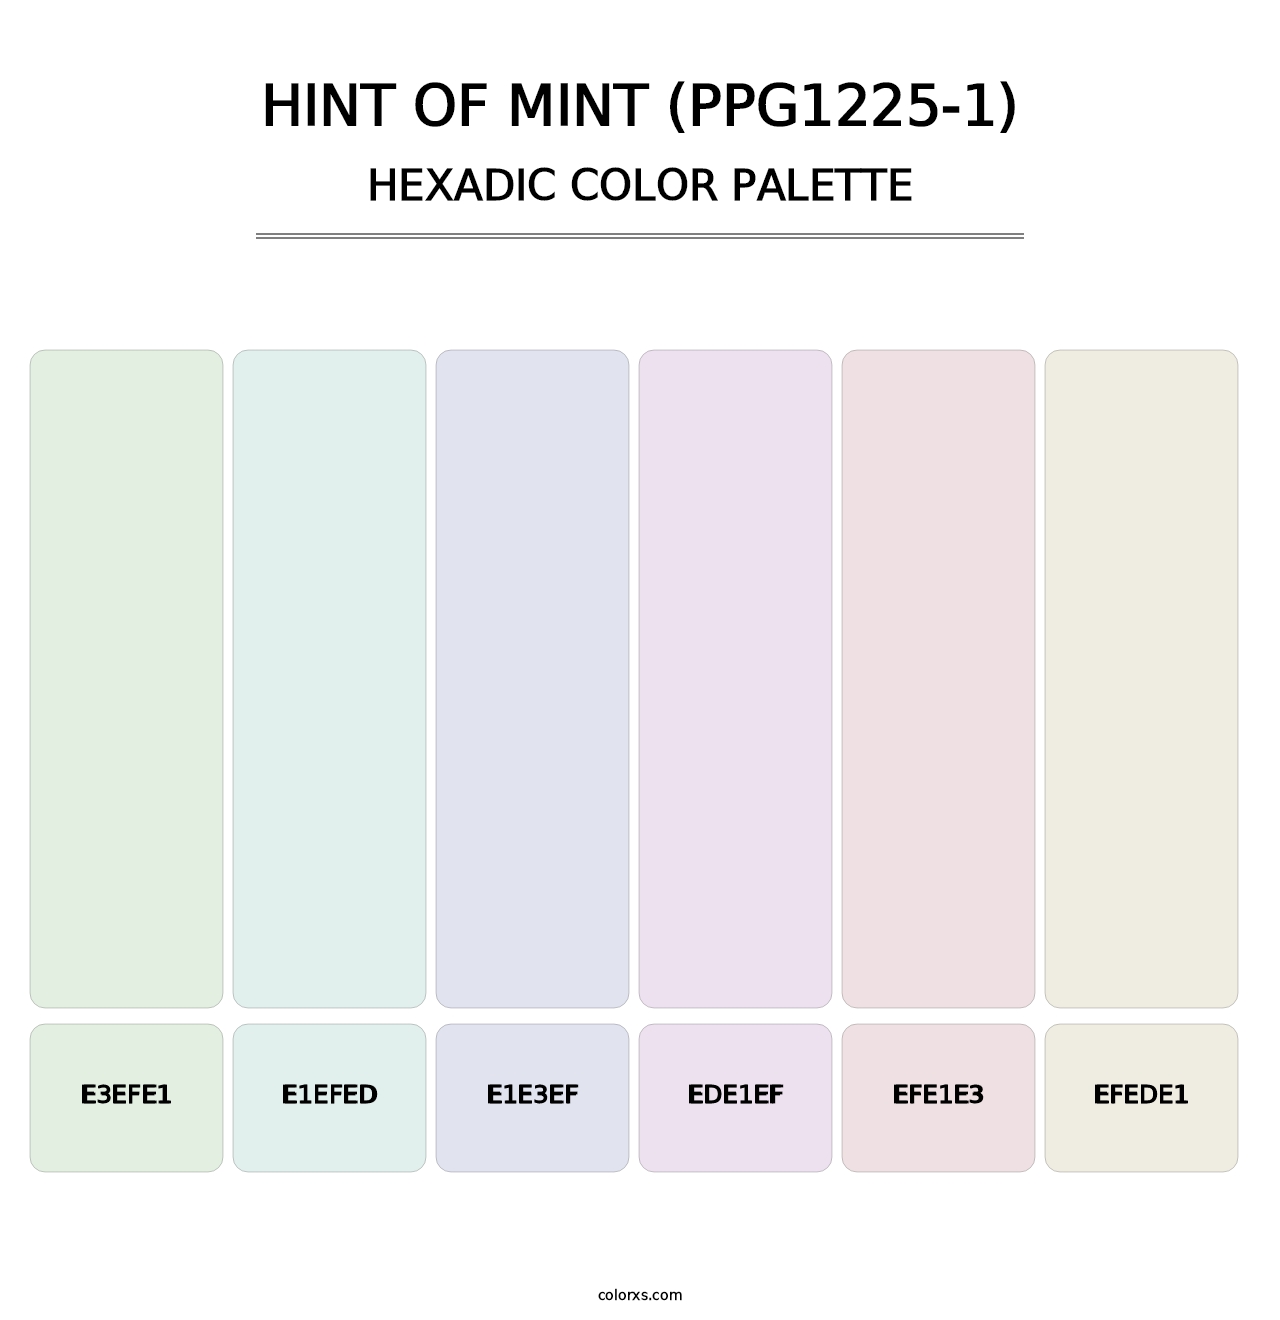 Hint Of Mint (PPG1225-1) - Hexadic Color Palette